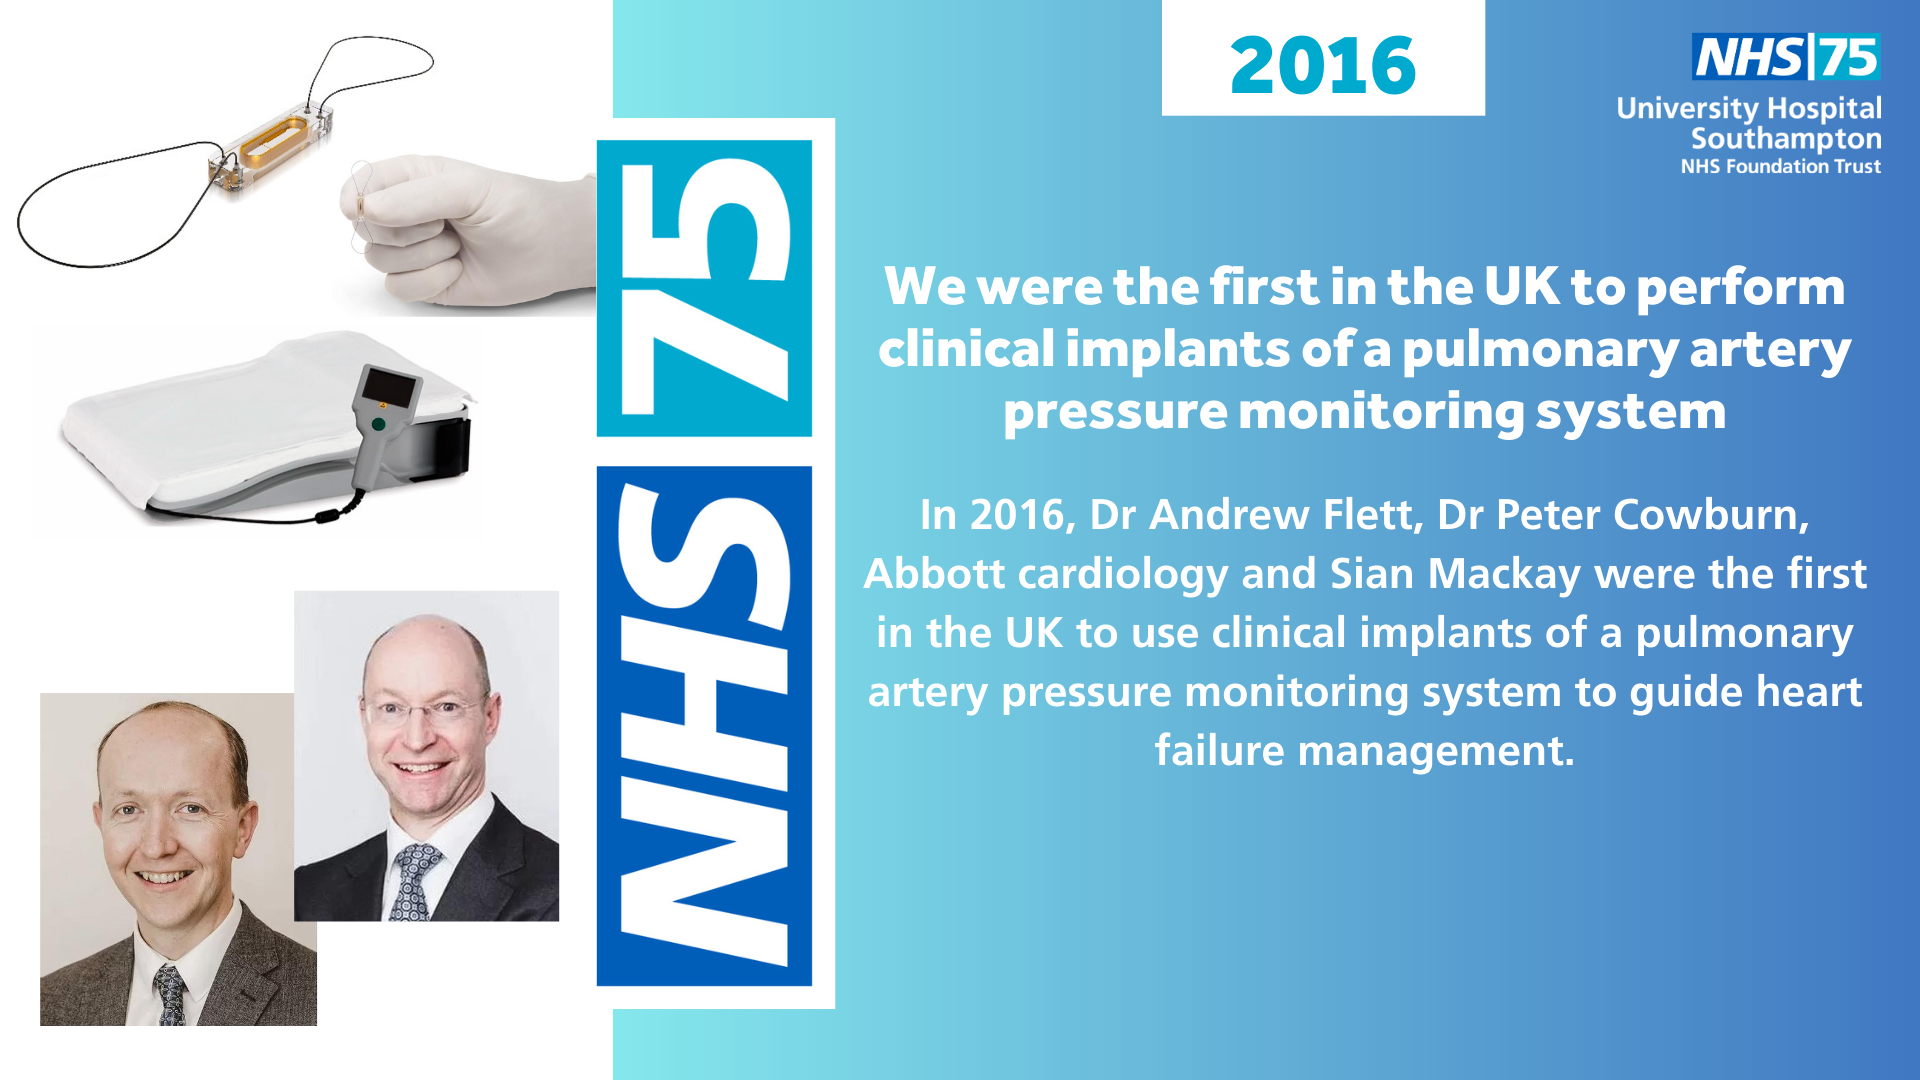 We were the first in the UK to perform clinical implants of a pulmonary artery pressure monitoring system